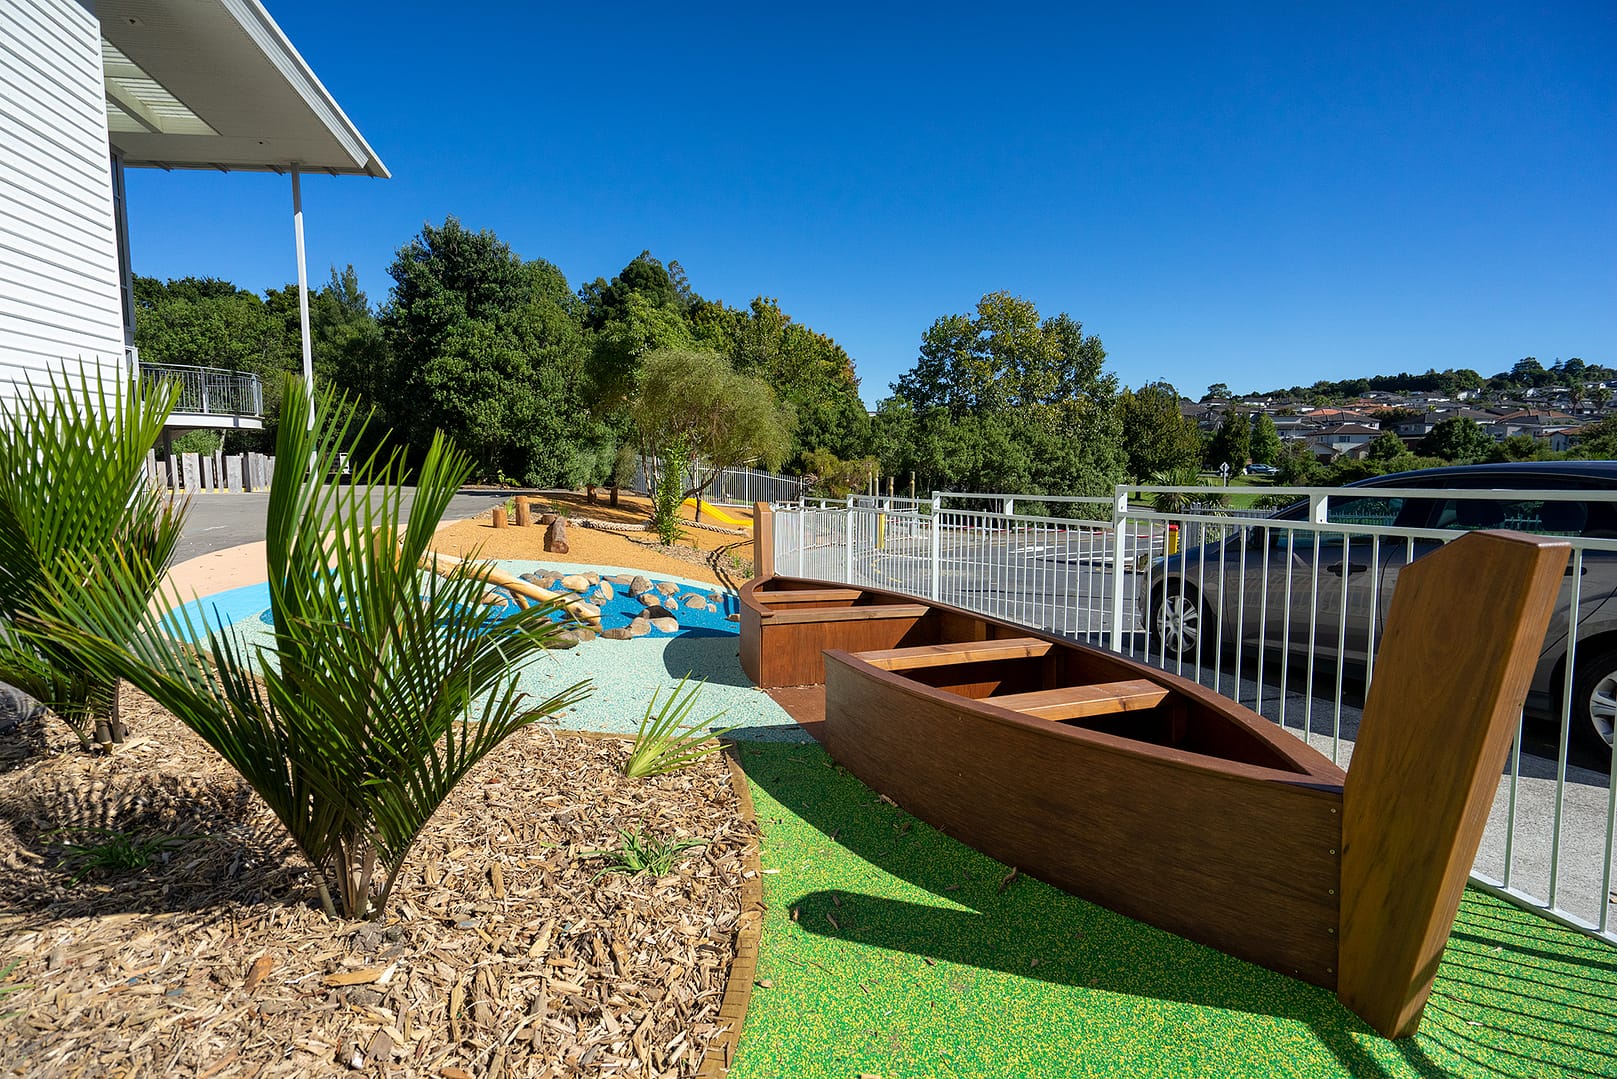 Playground with a boat, vegetation rubber and bark surface